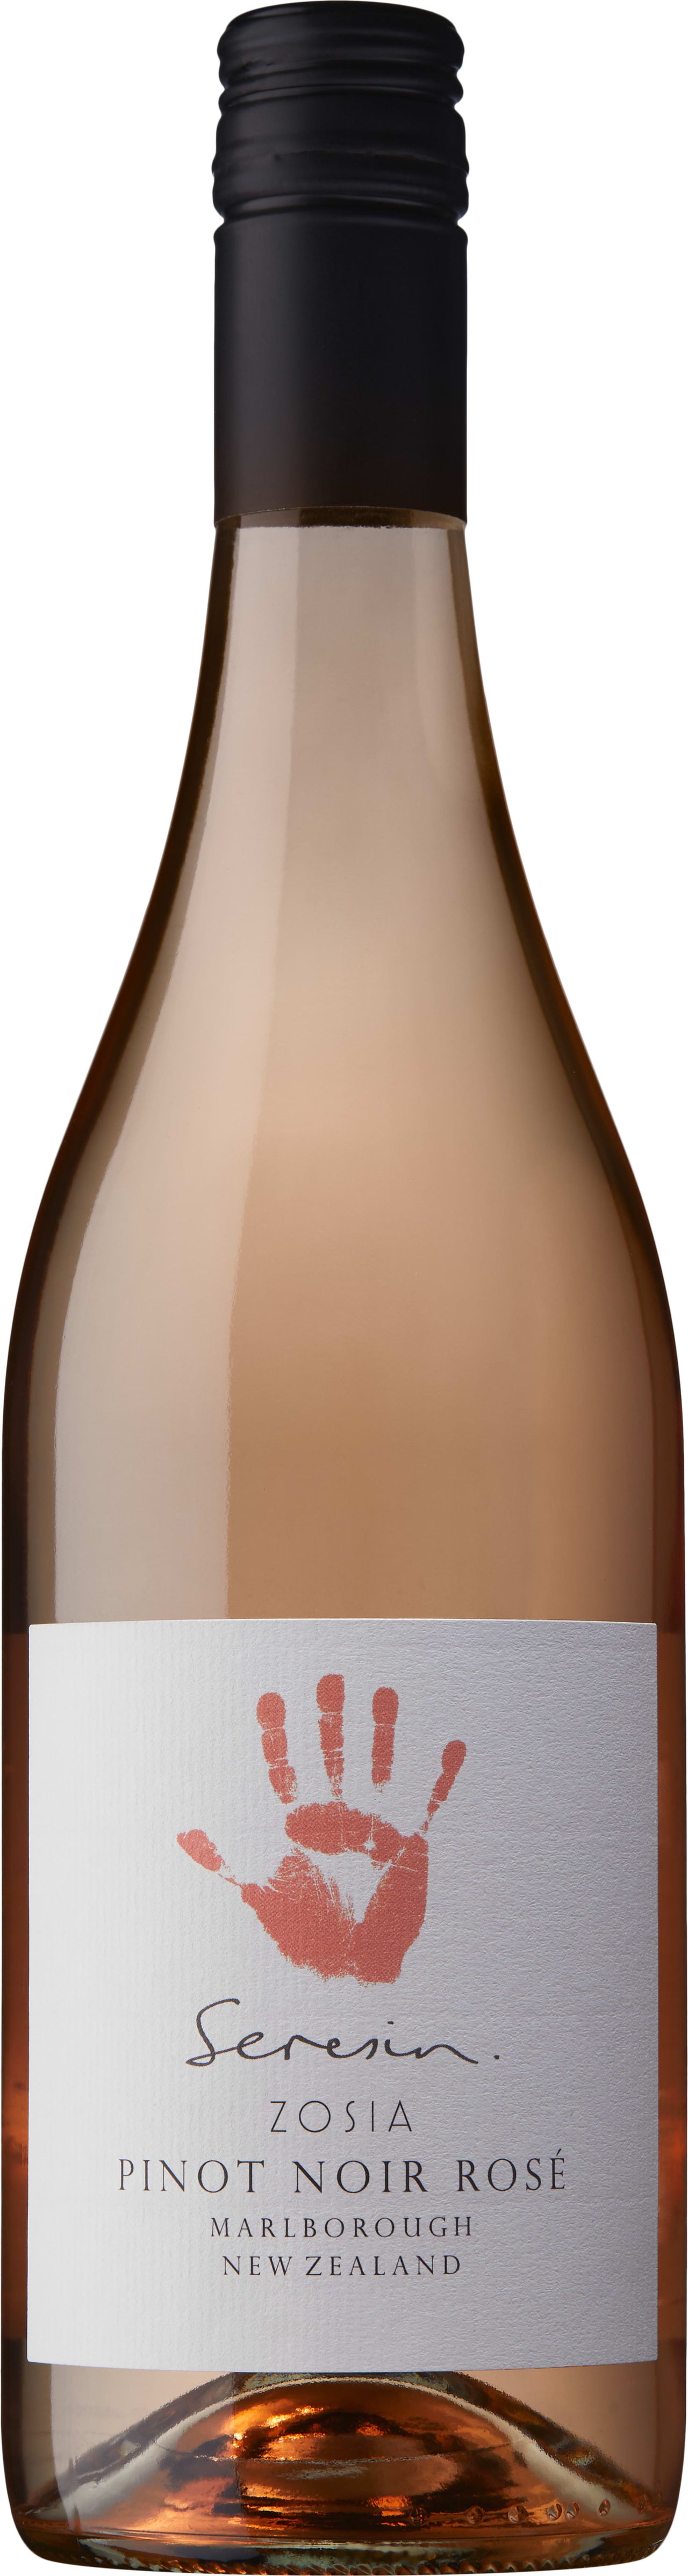 Seresin Estate Zosia Organic Pinot Noir Rose 2022 75cl - Buy Seresin Estate Wines from GREAT WINES DIRECT wine shop